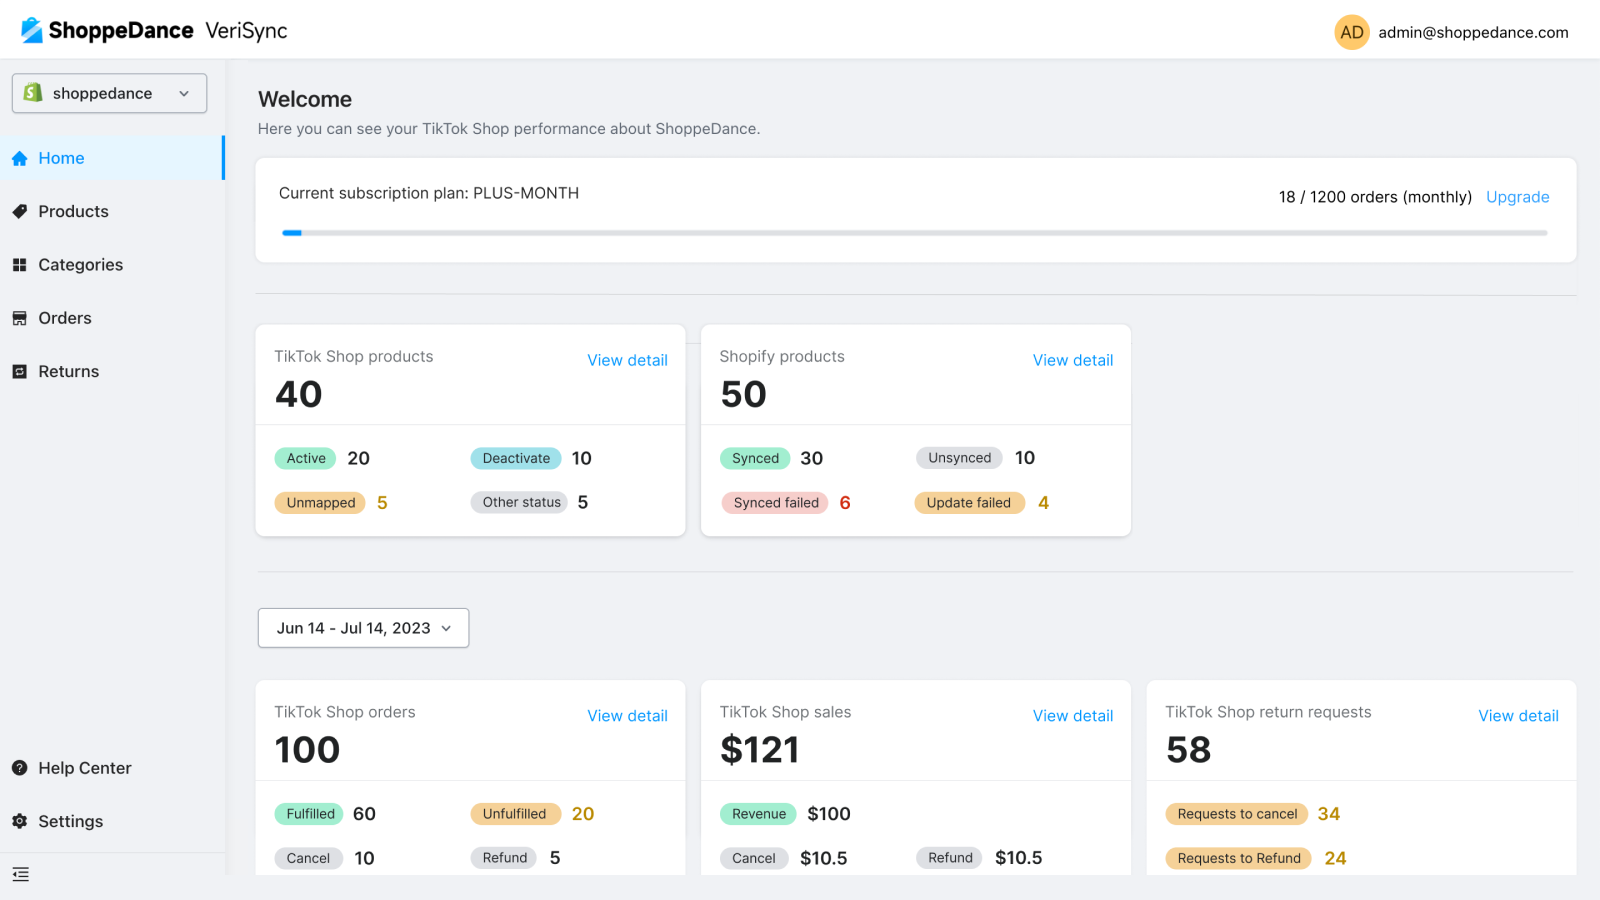 View synced products, orders and sales on a dashboard